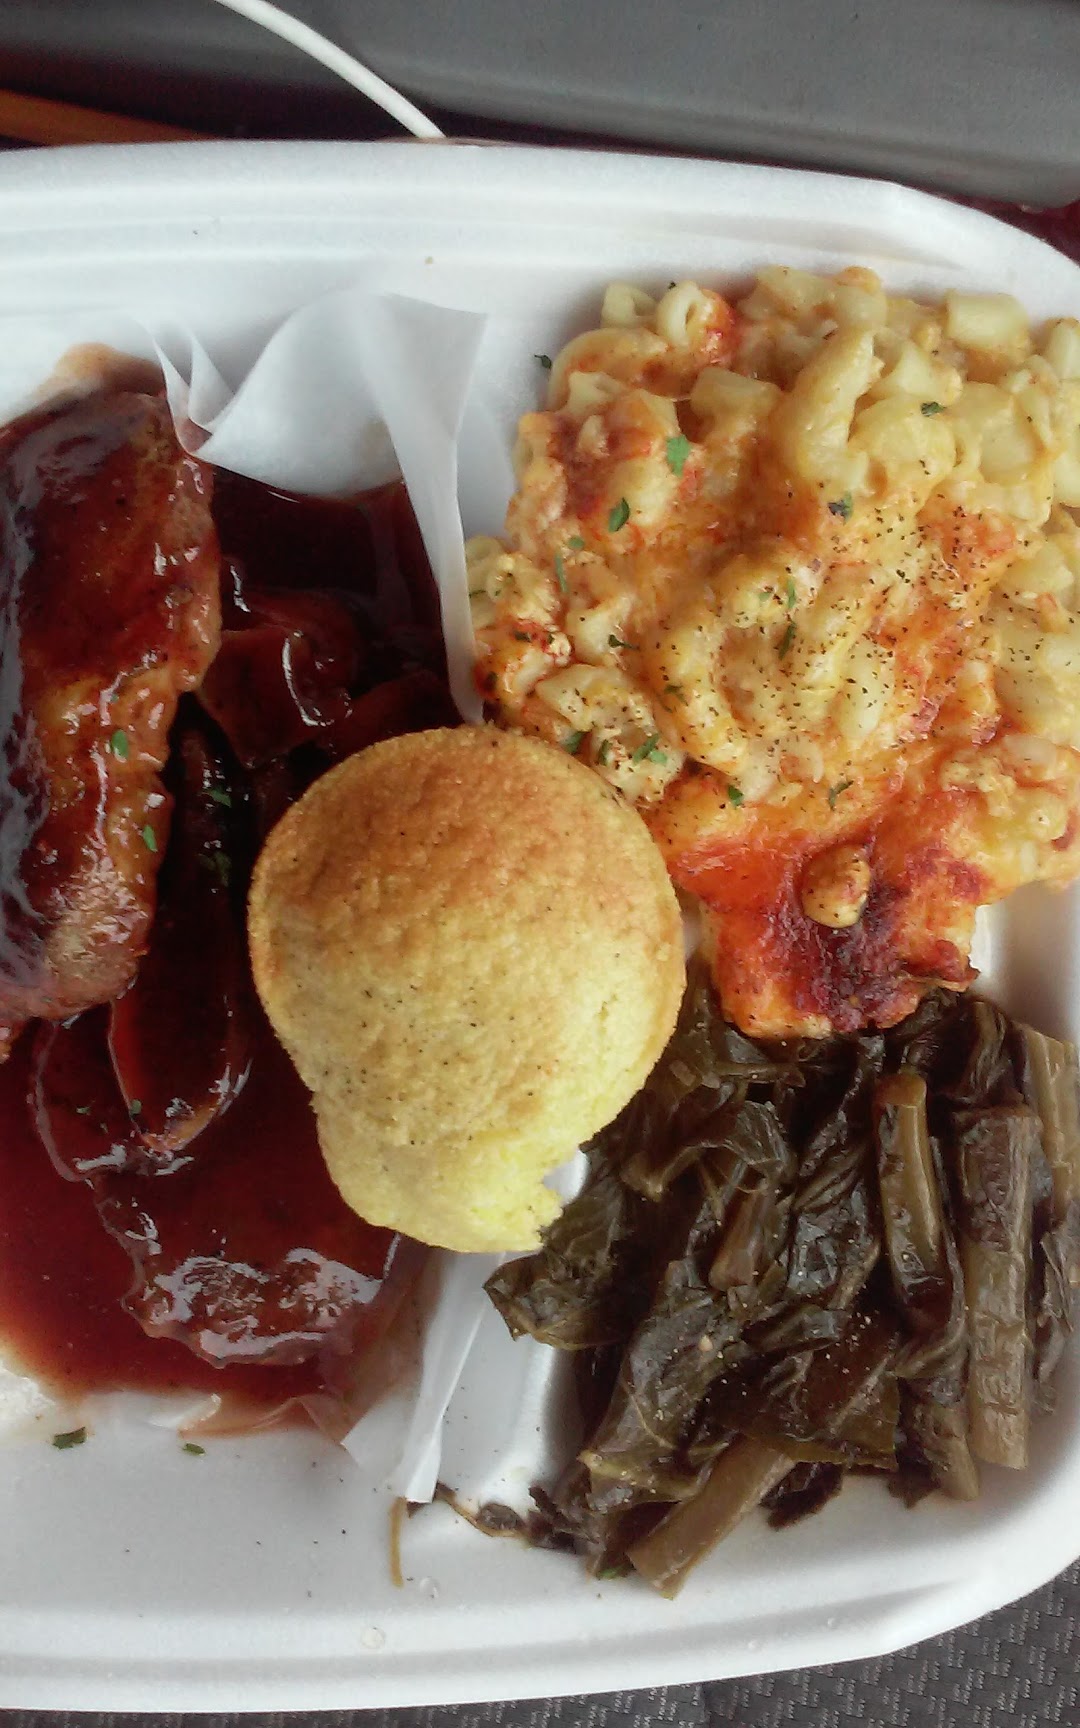 Heights Soul Food and Grill